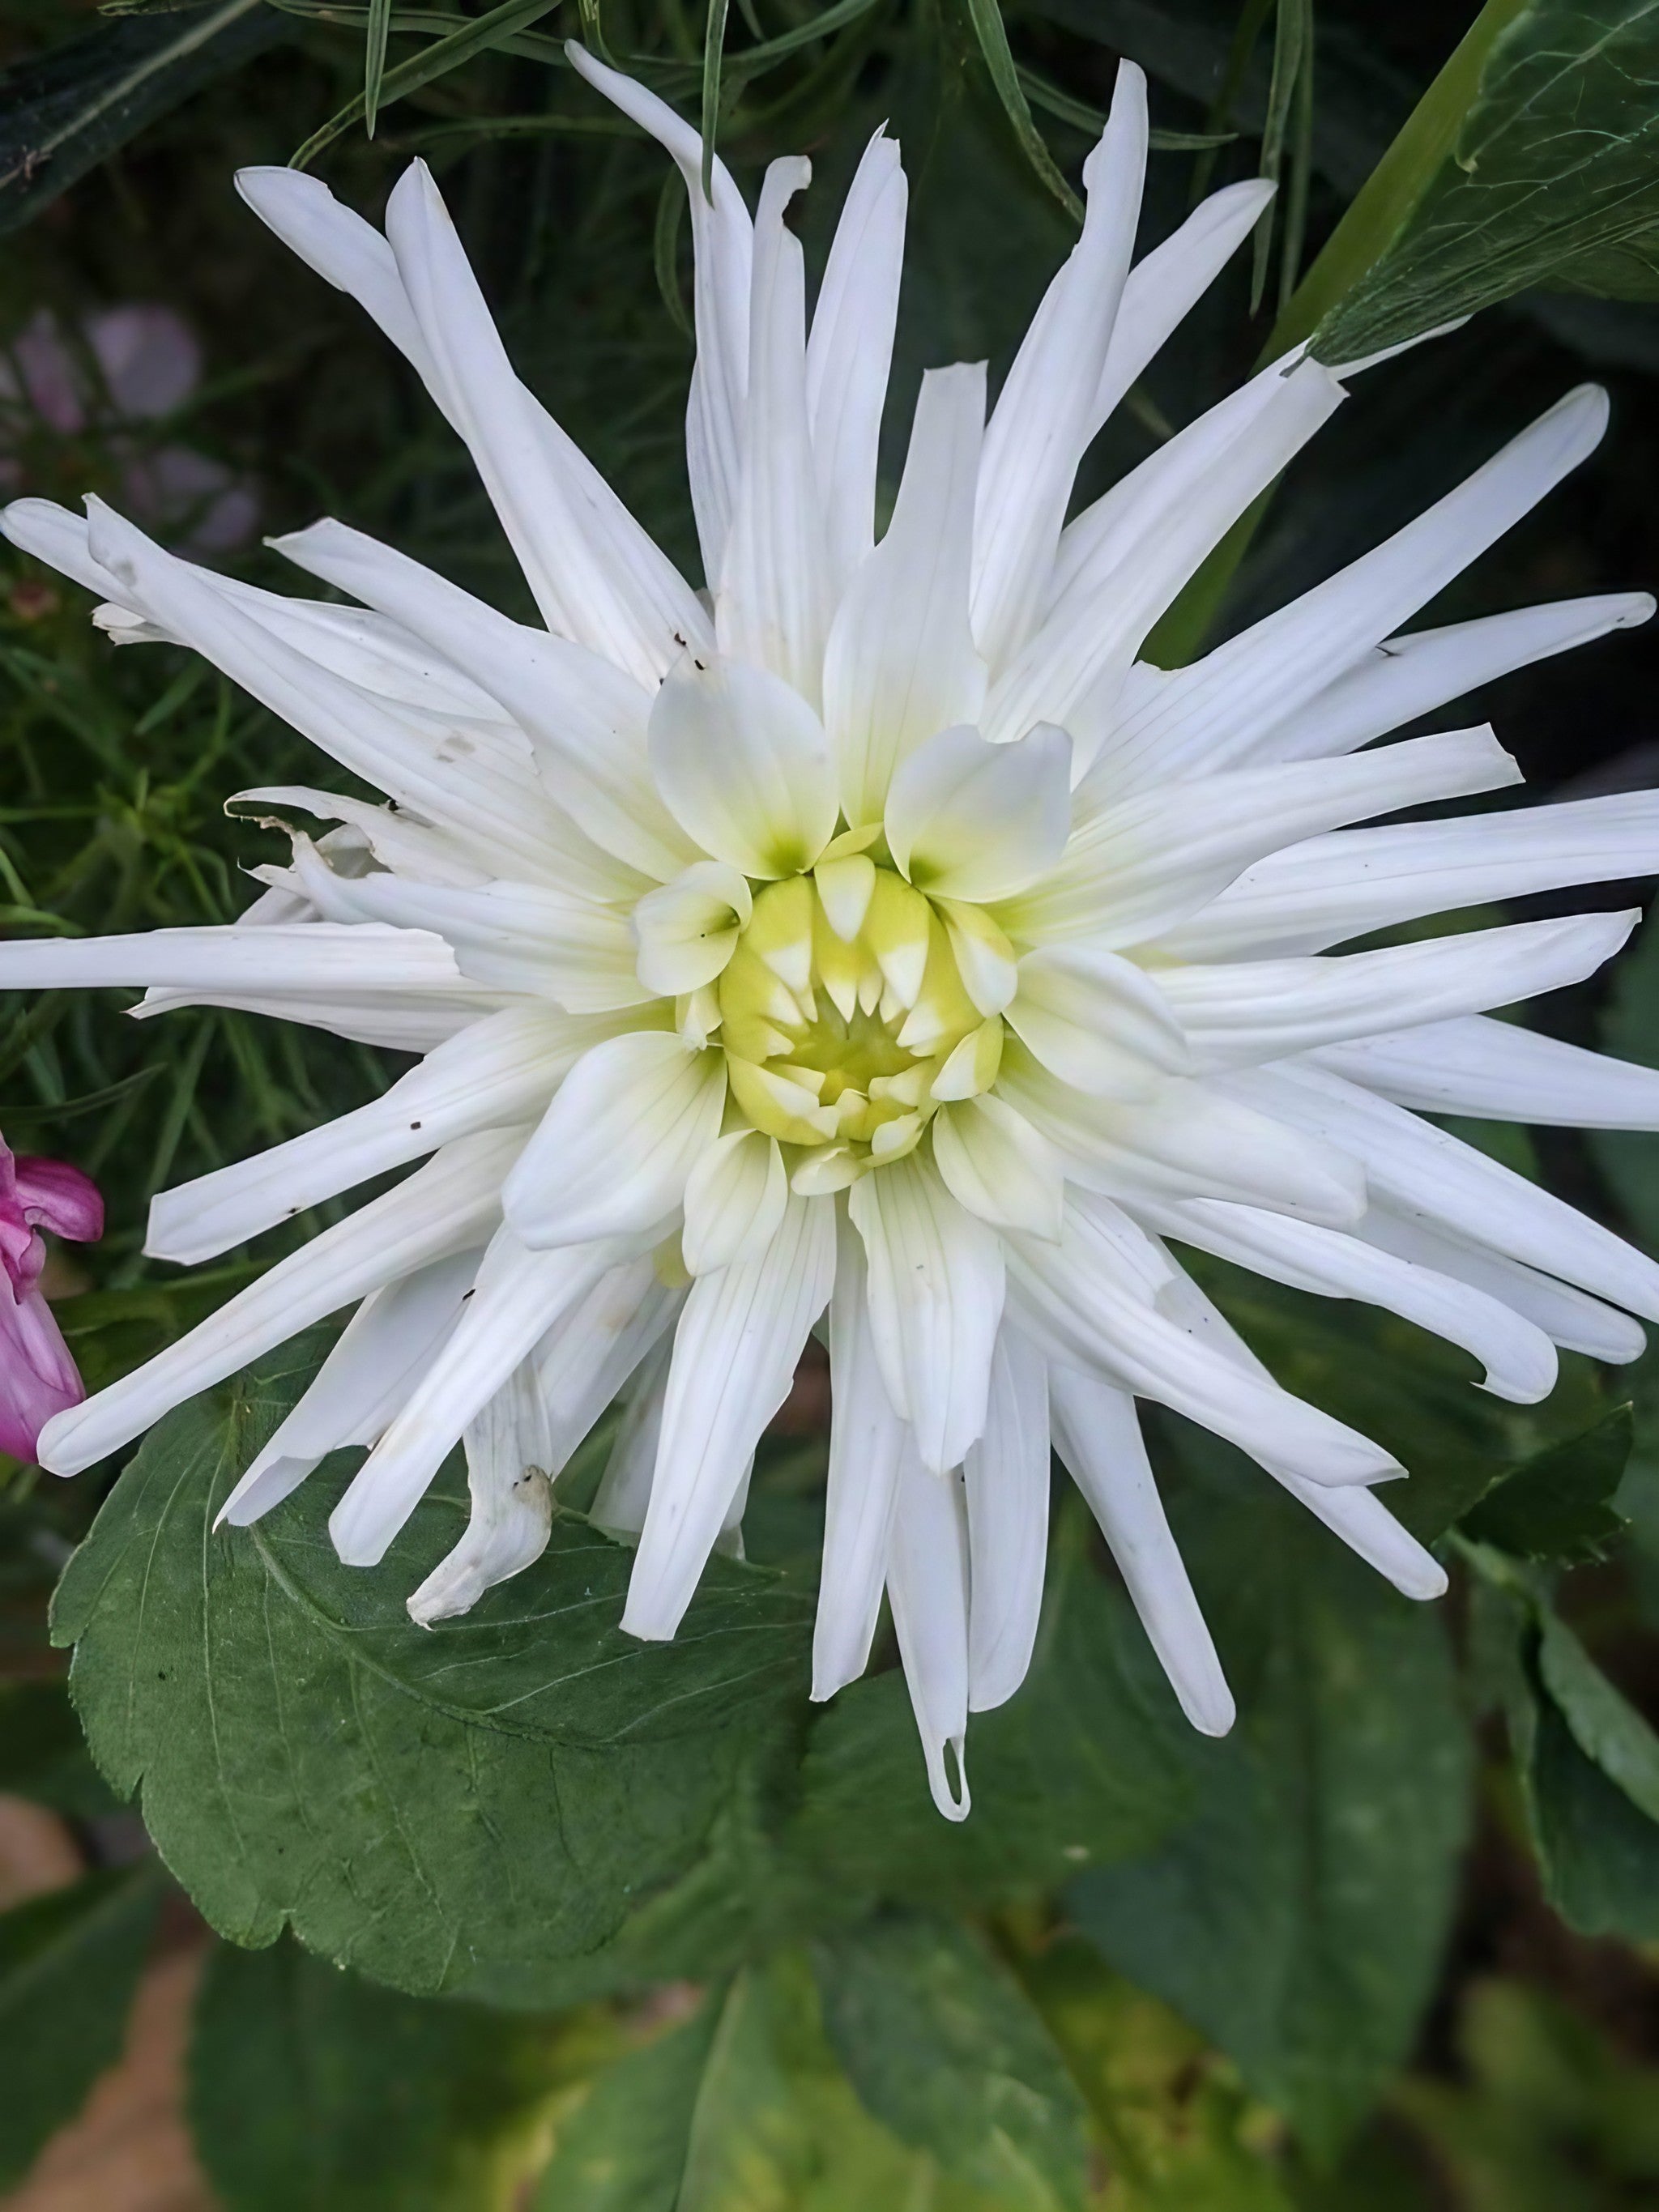 Garden scene featuring a cactus dahlia with white blooms and a hint of green at the center